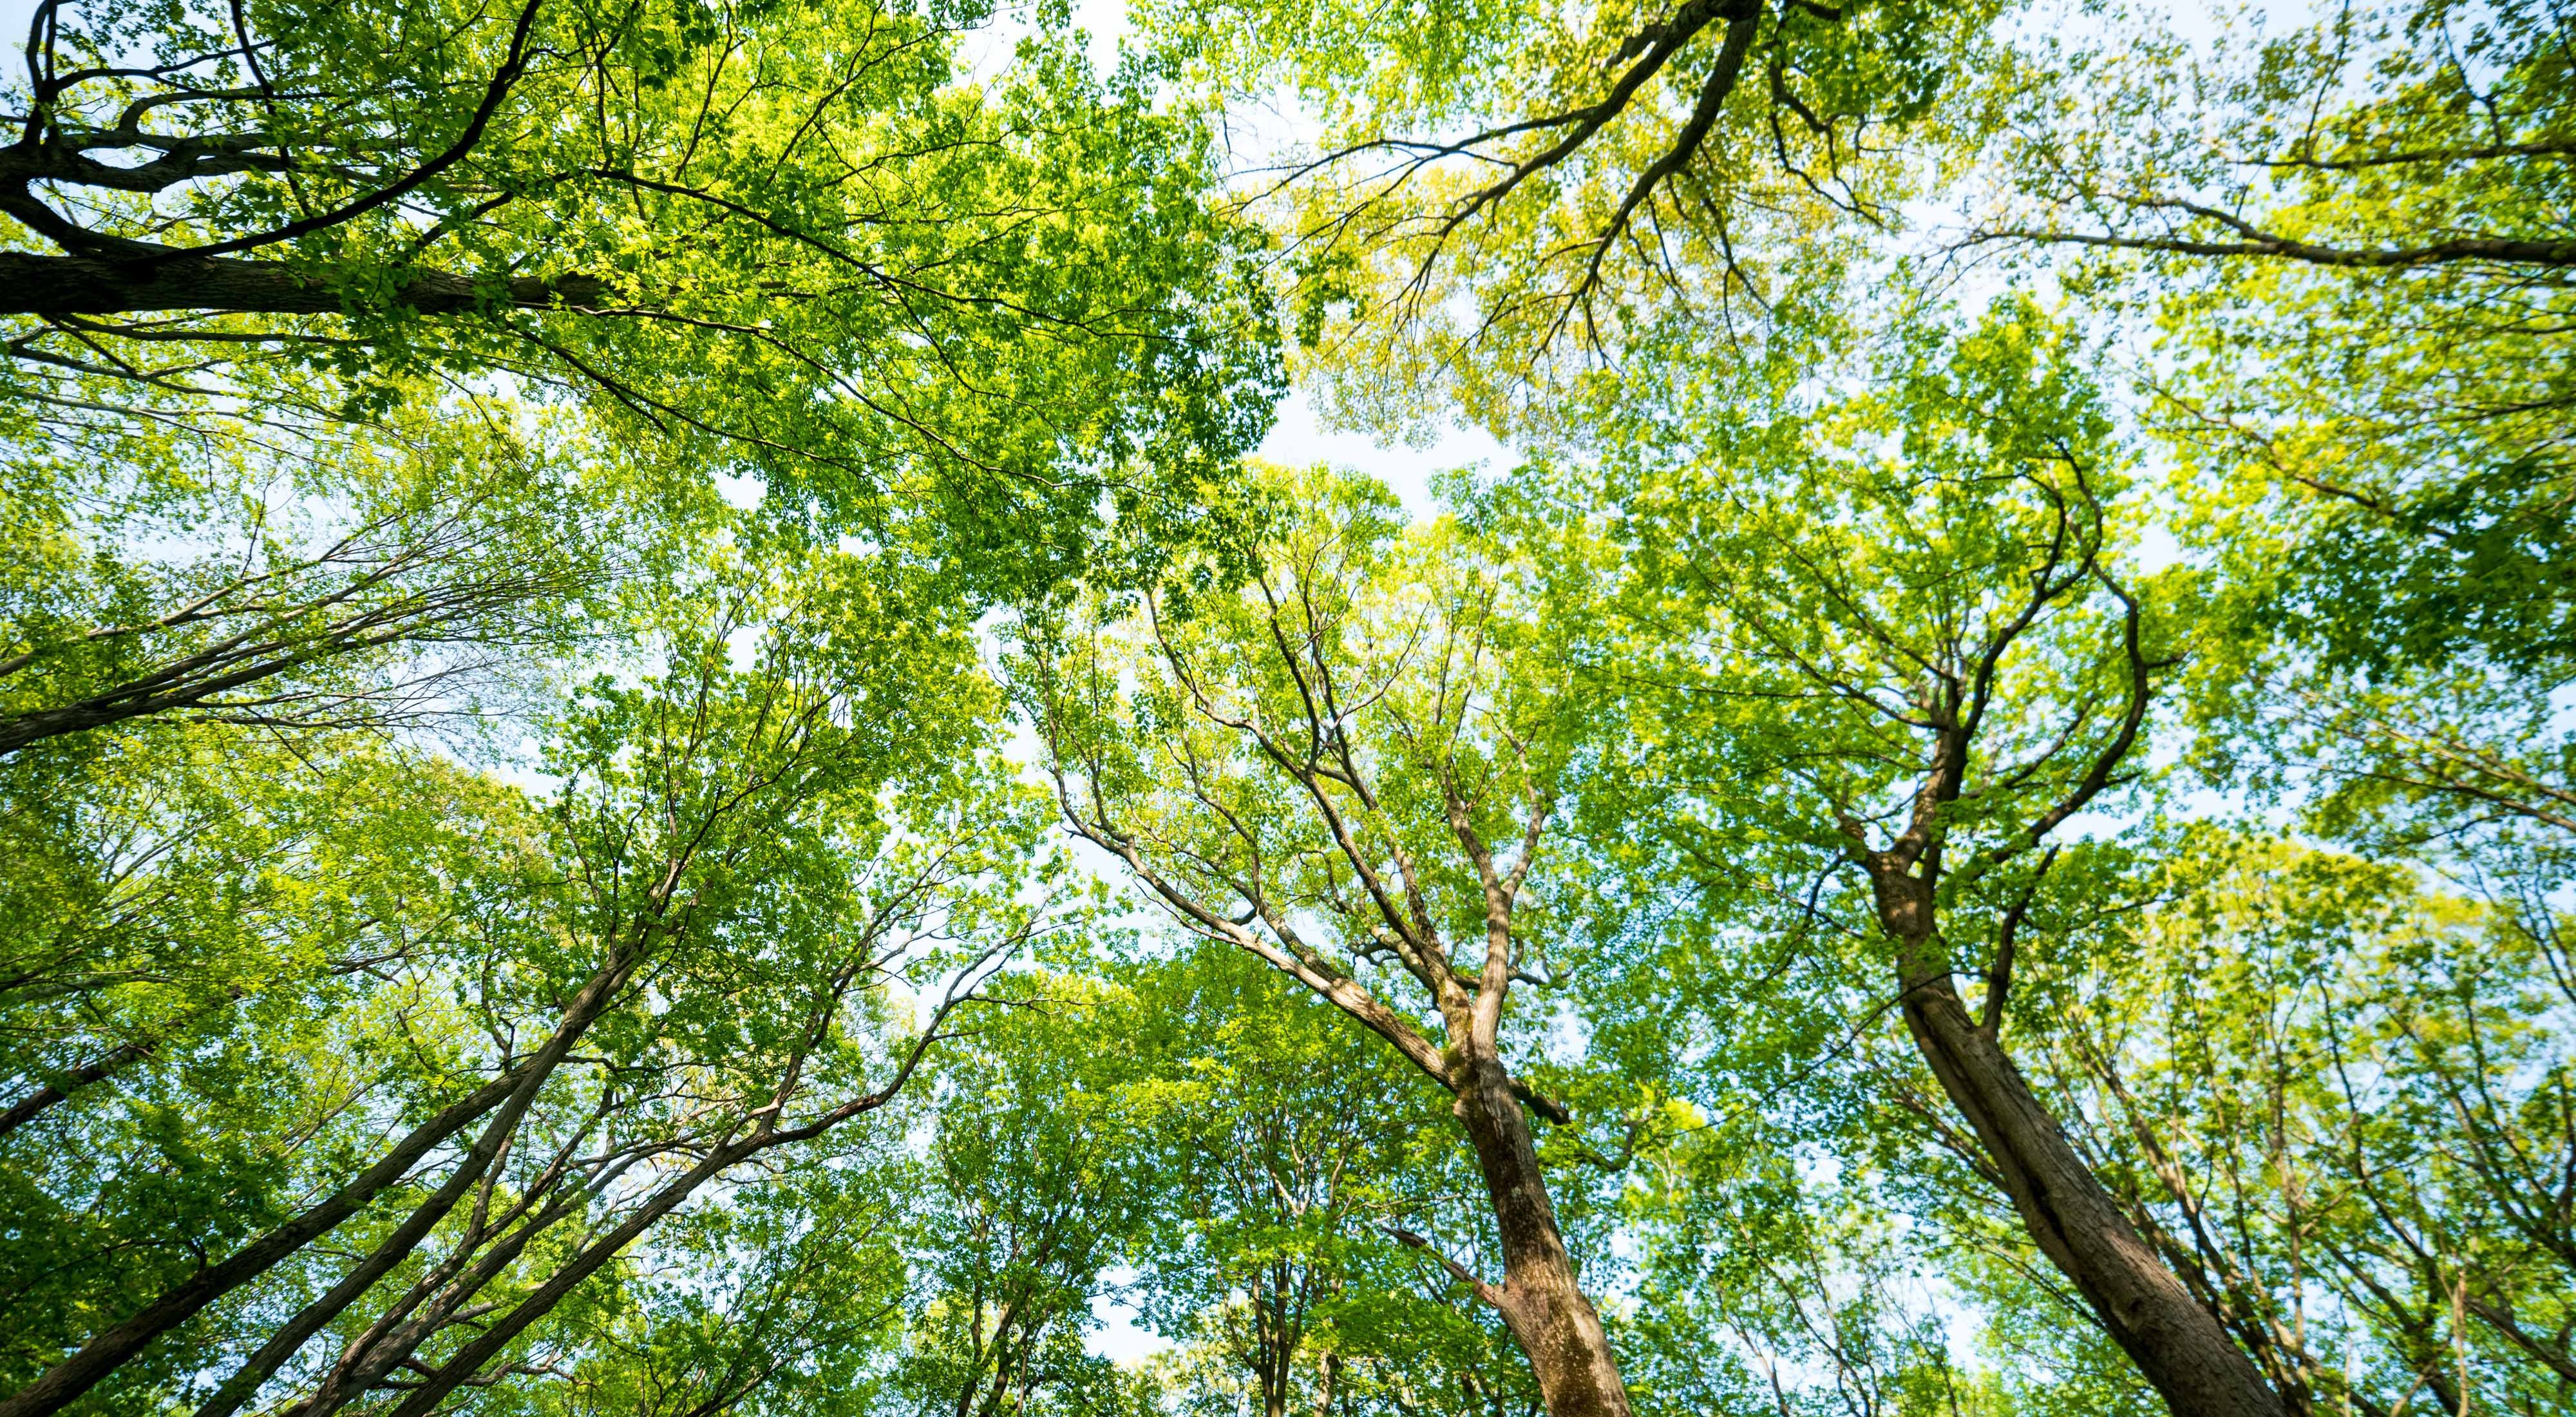 Looking up to a canopy of green, densely populated trees.